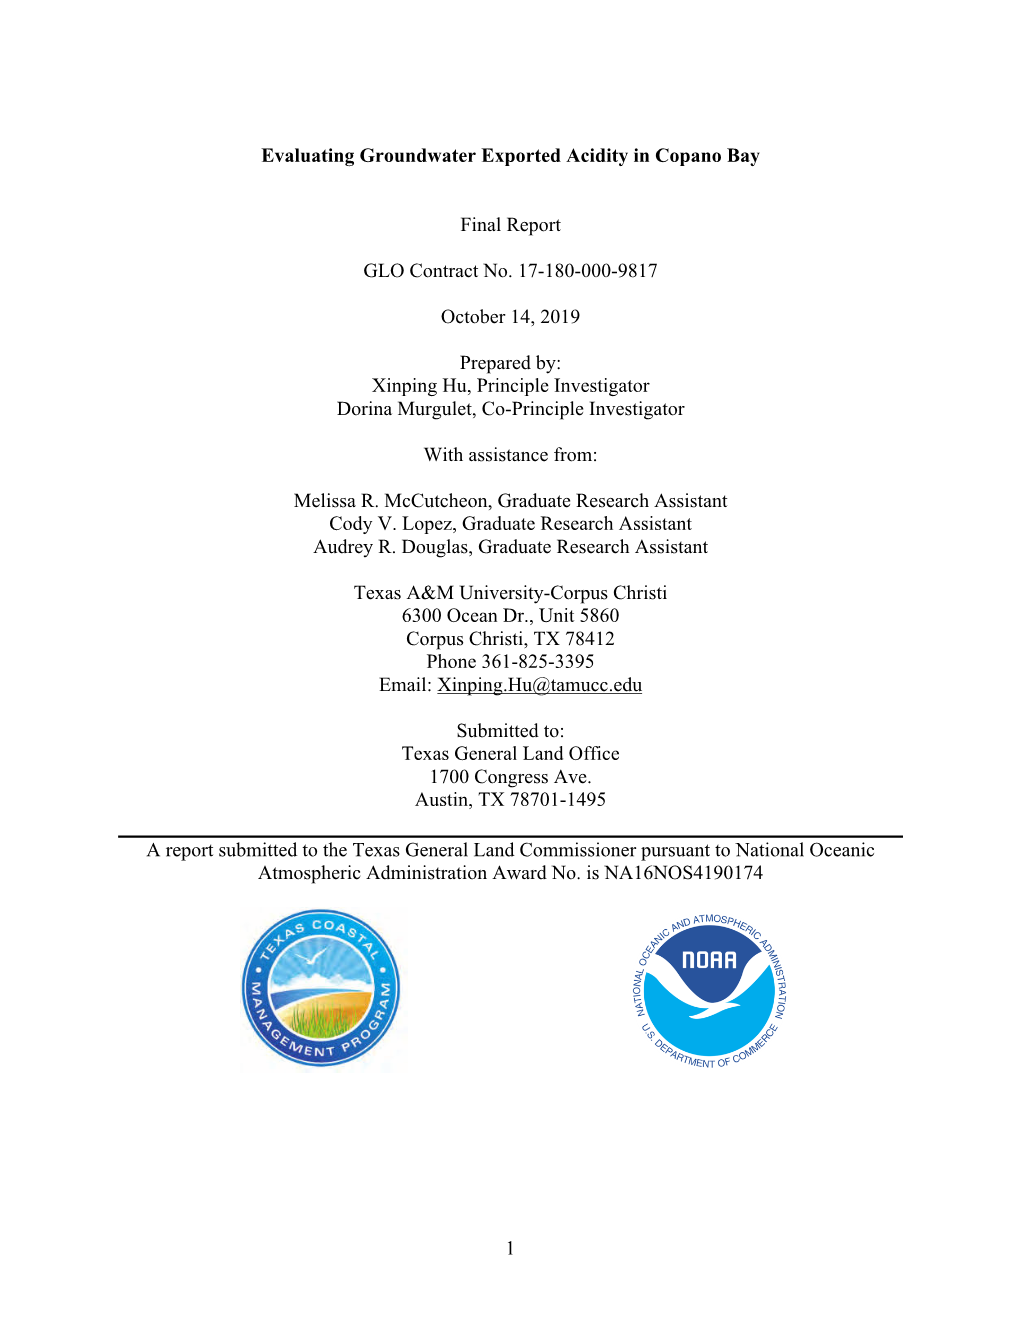 Evaluating Groundwater Exported Acidity in Copano Bay Final Report